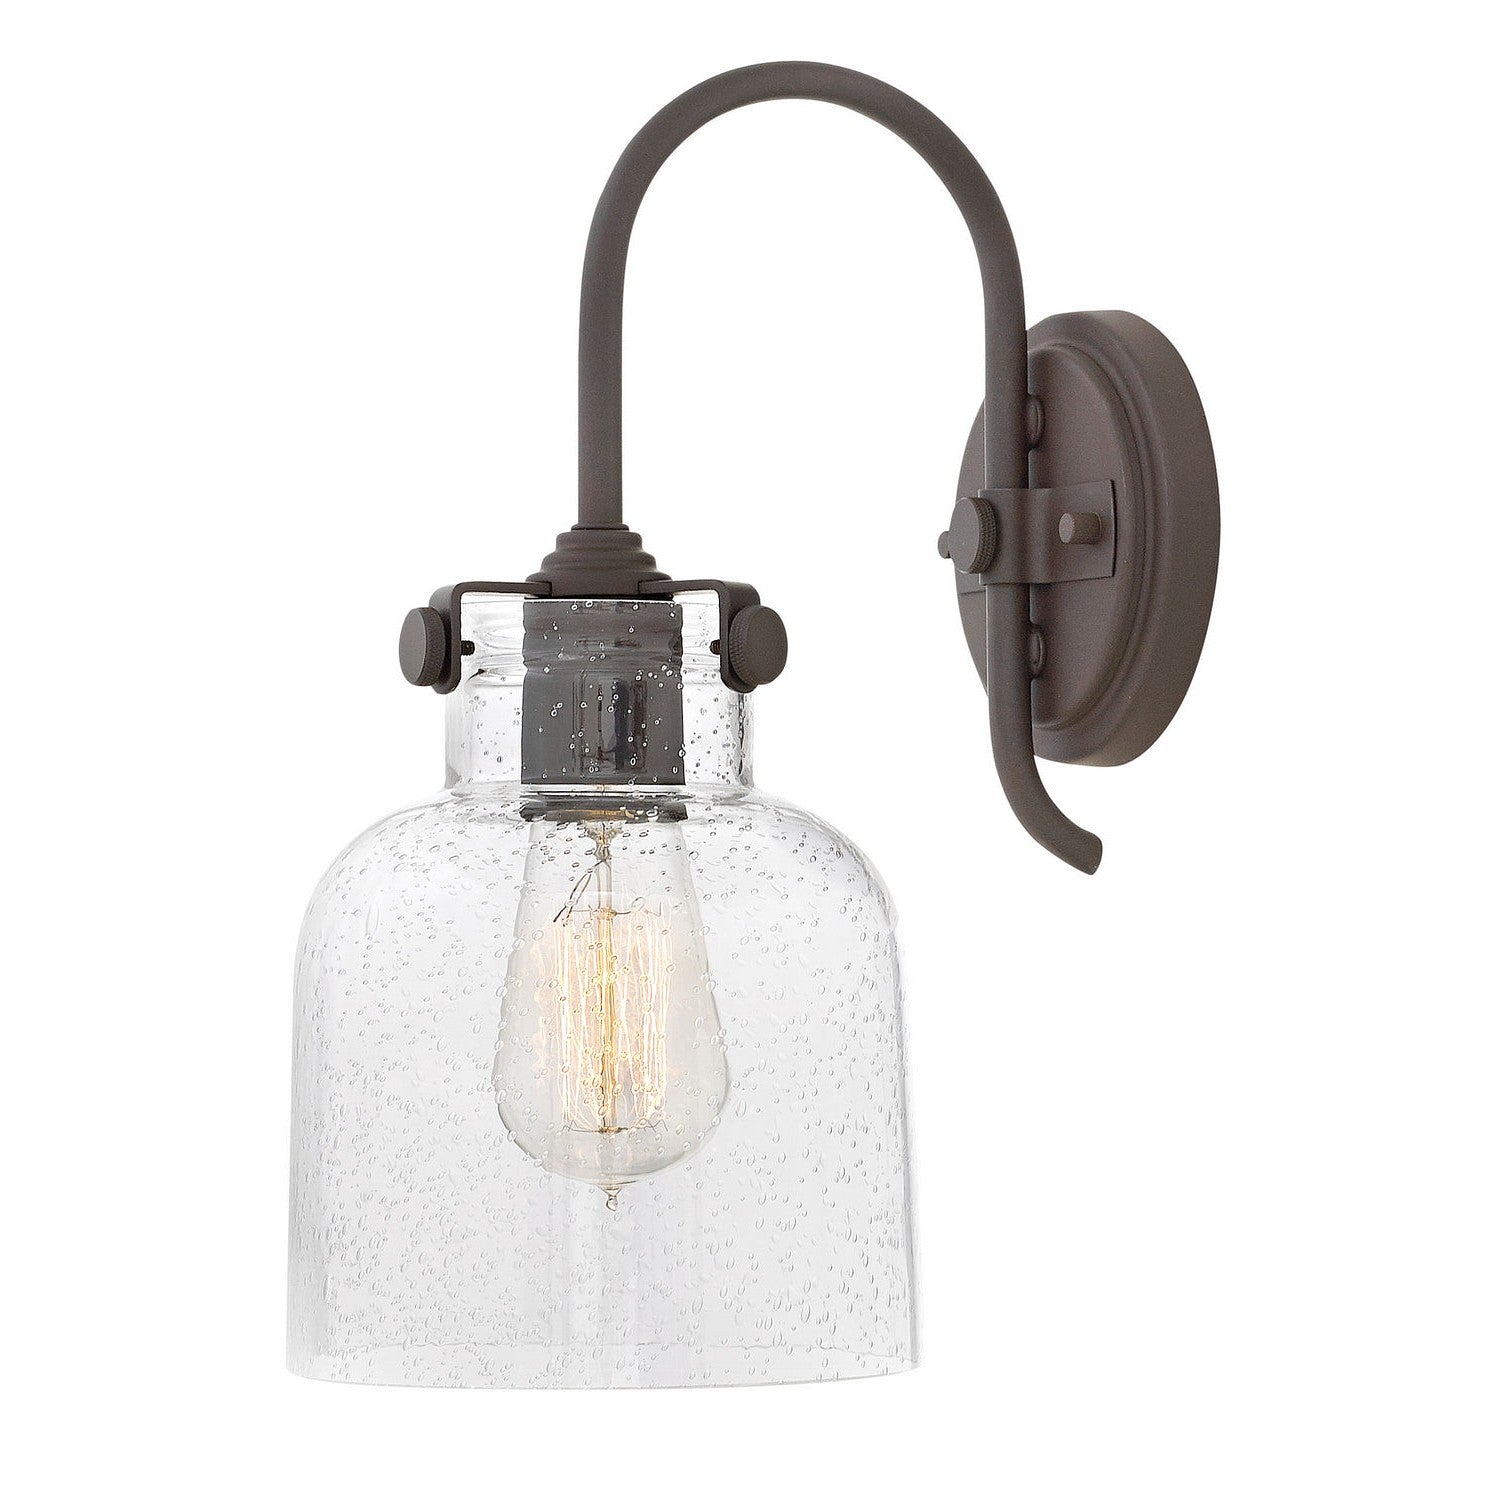 Hinkley Congress 31700OZ Wall Sconce Light - Oil Rubbed Bronze